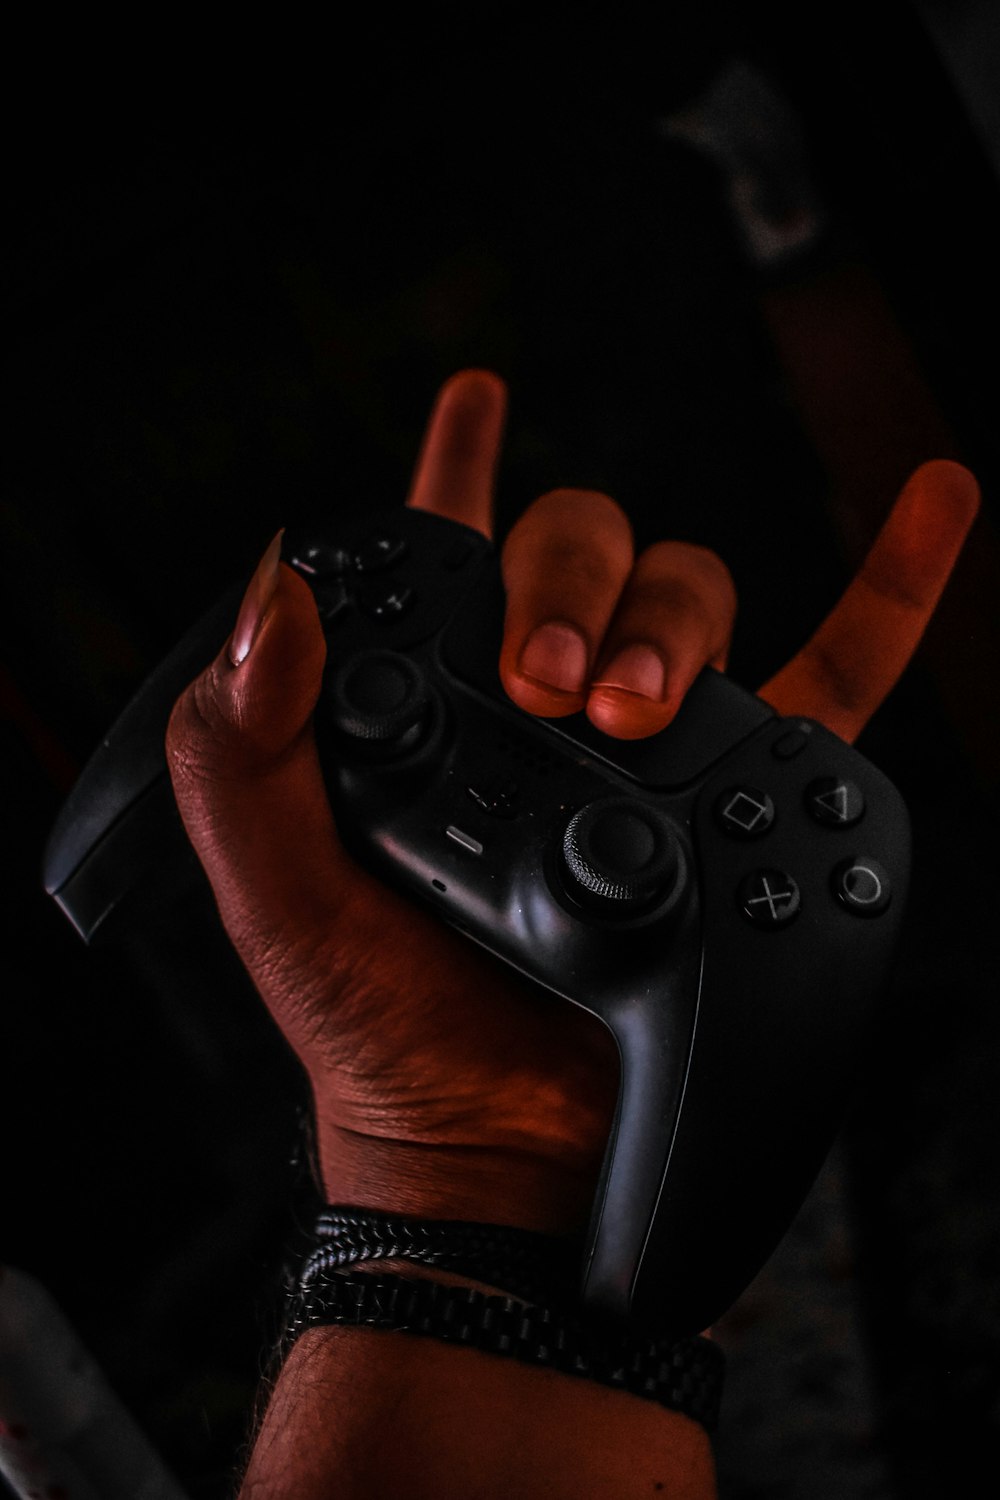 a person holding a video game controller in their hand